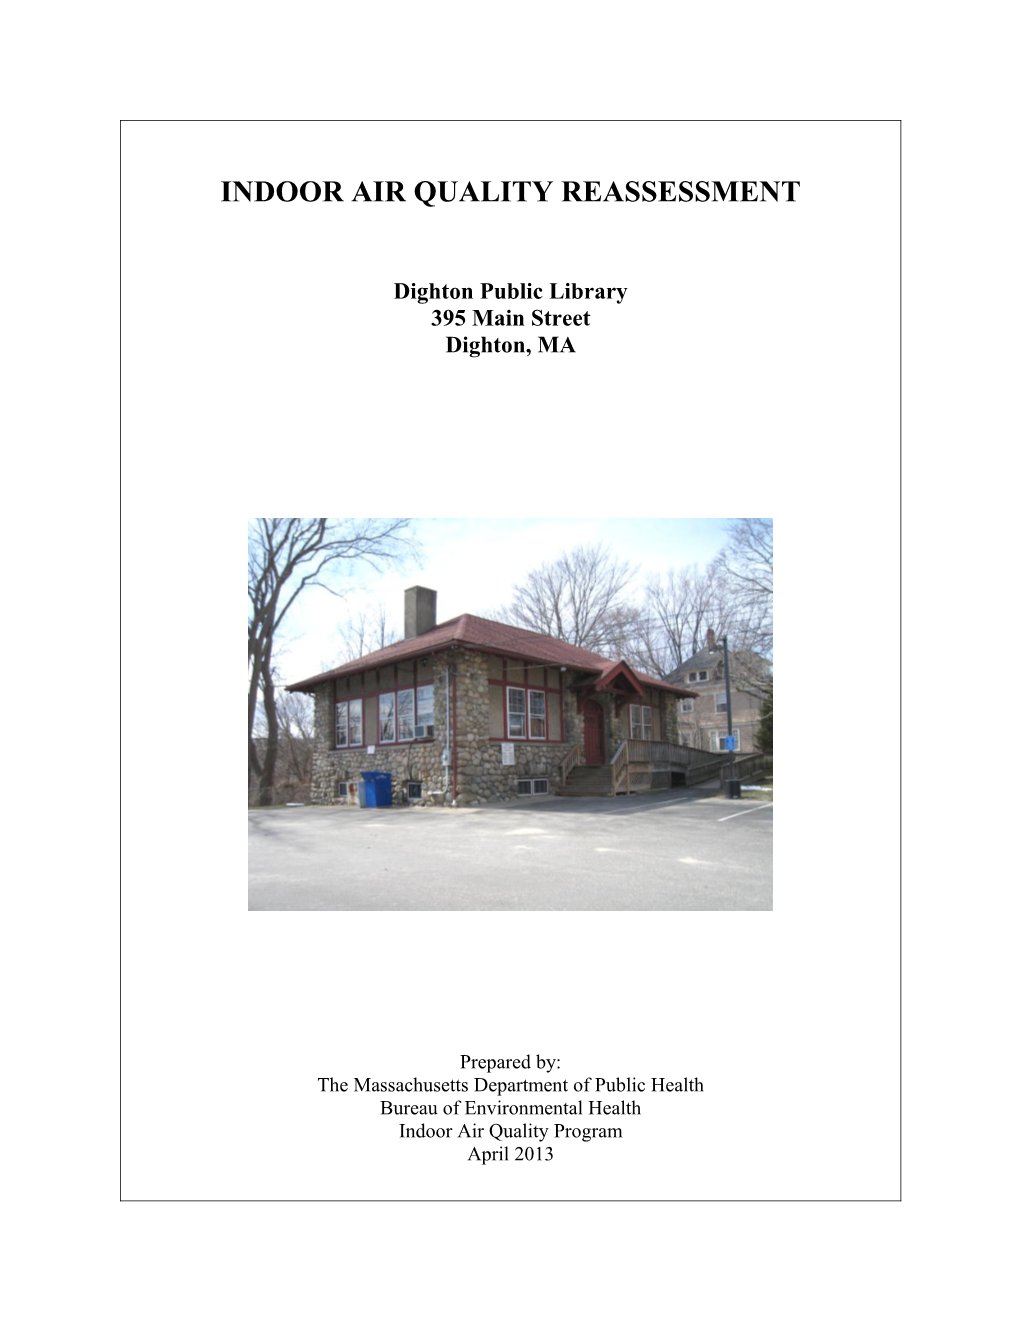 Indoor Air Quality Assessment - Dighton Public Library